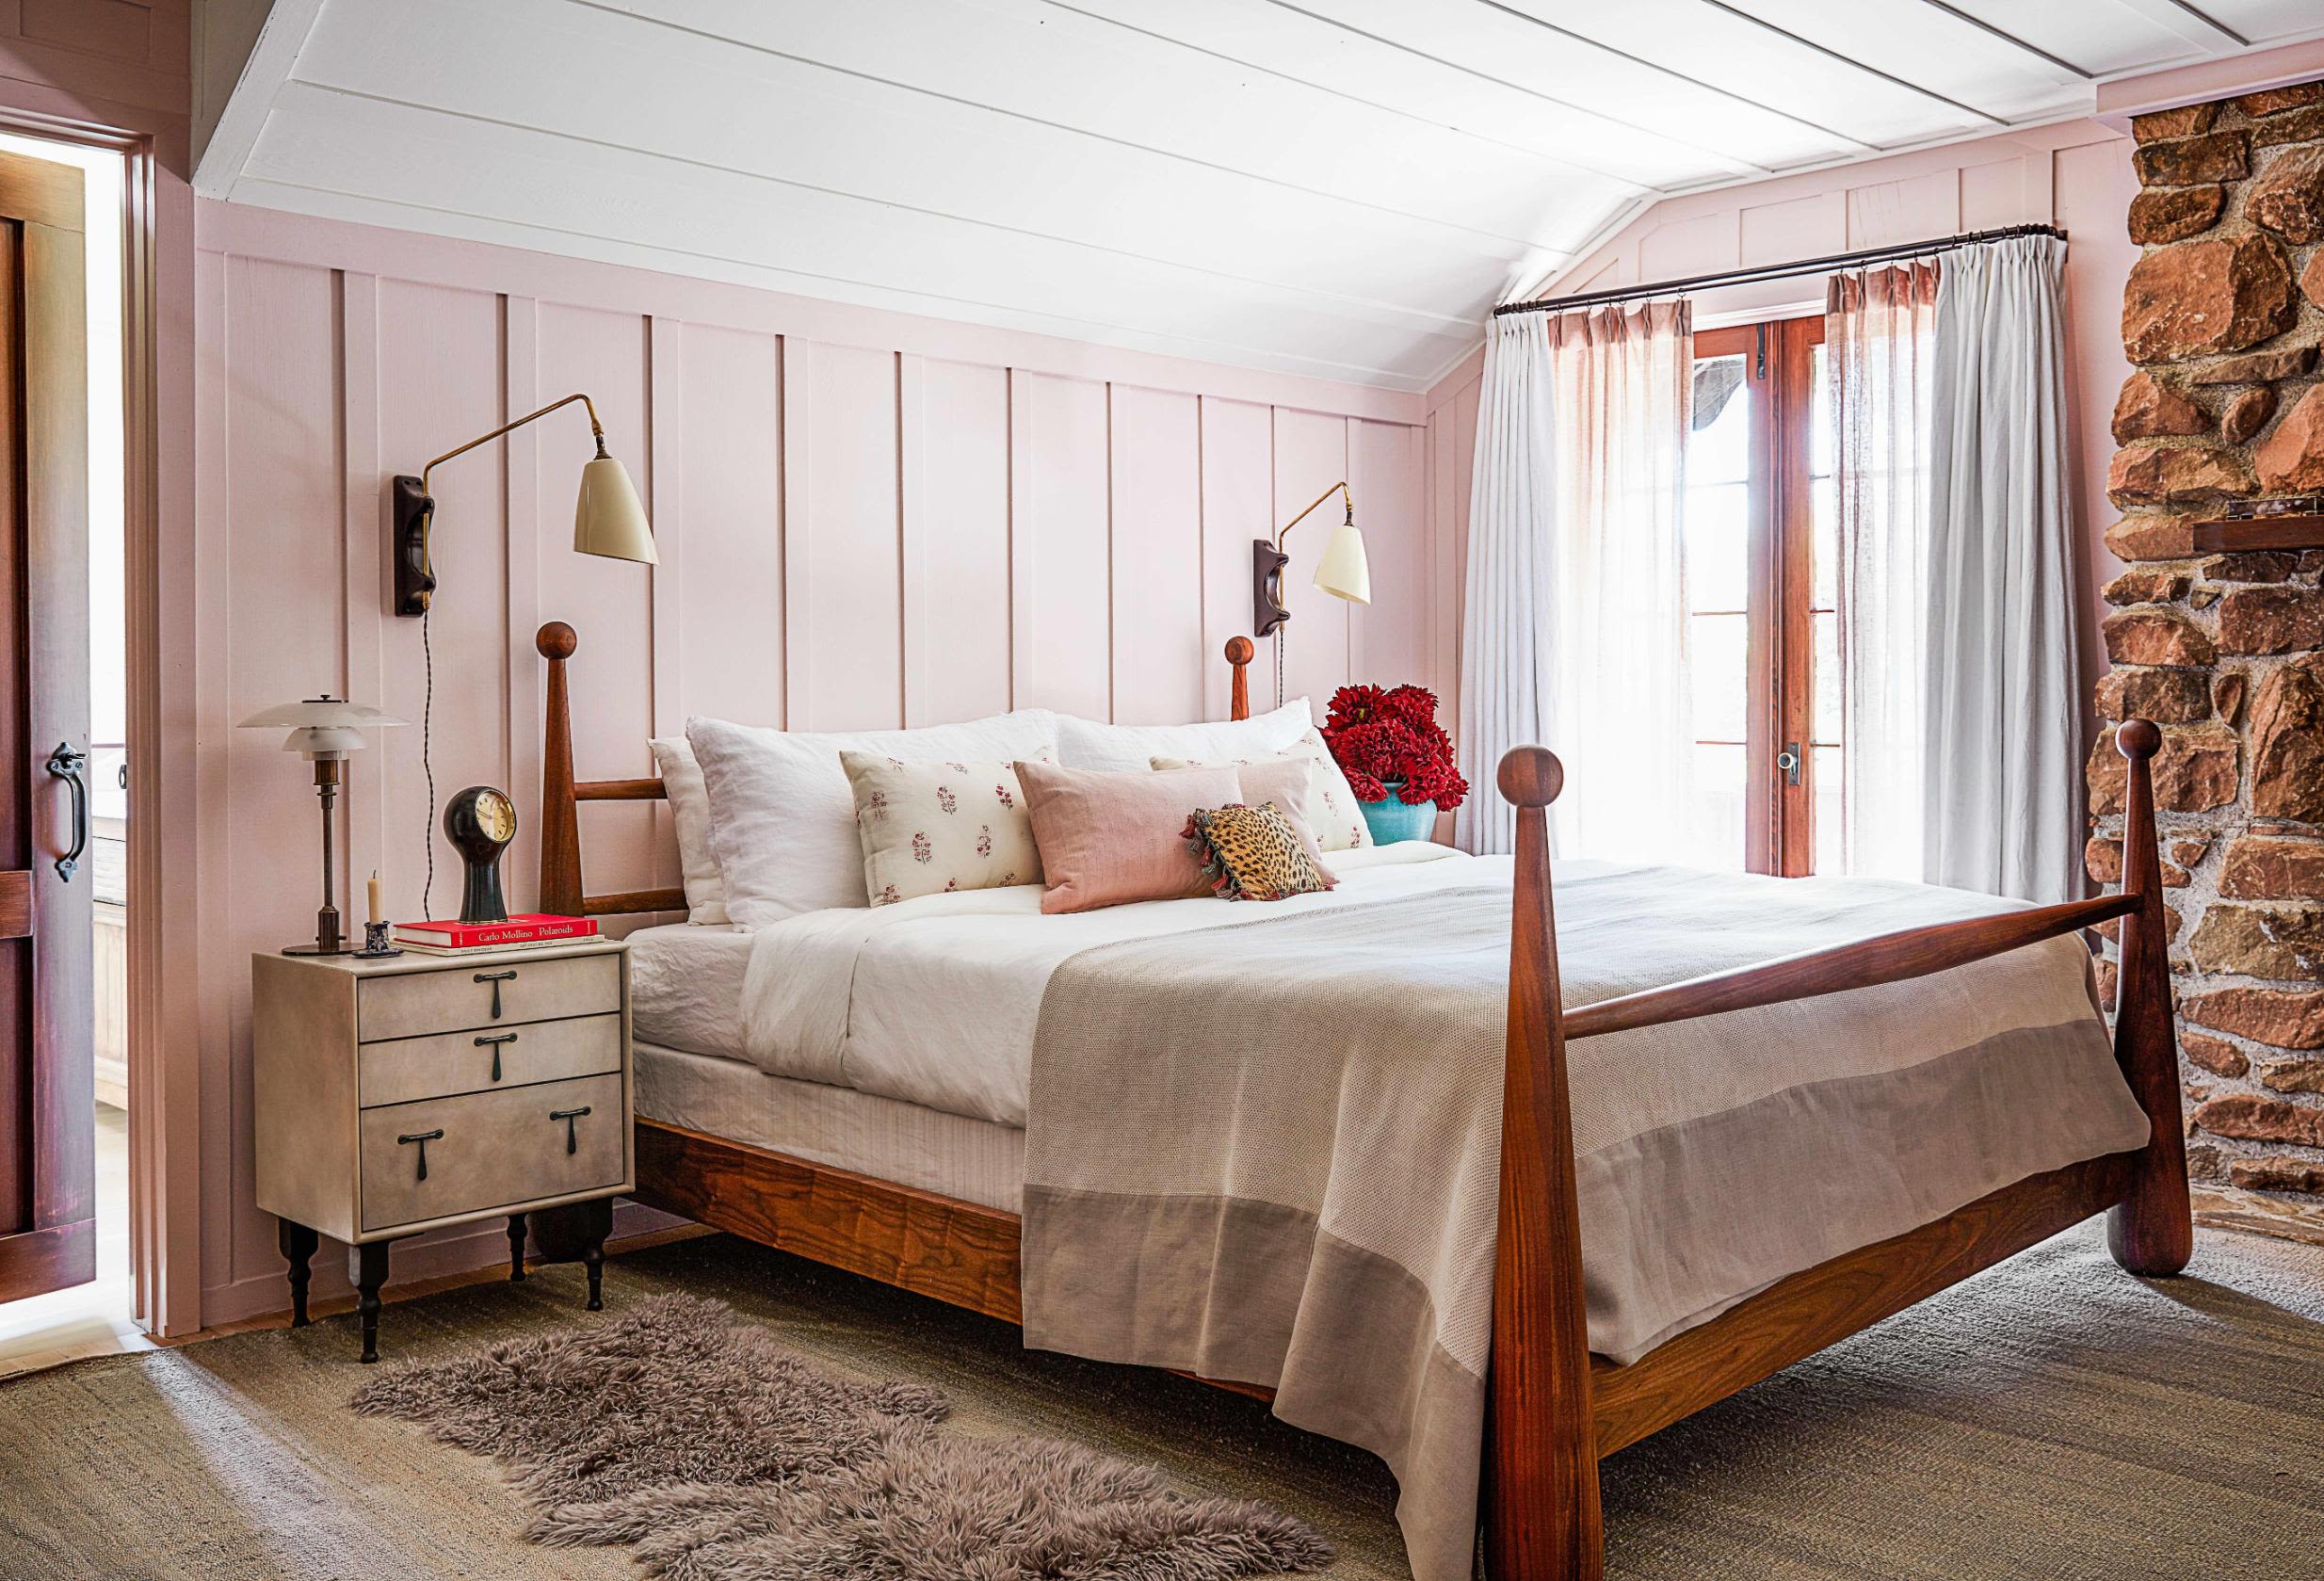 10 Pioneer Woman Bedding Options for a Country-Chic Home